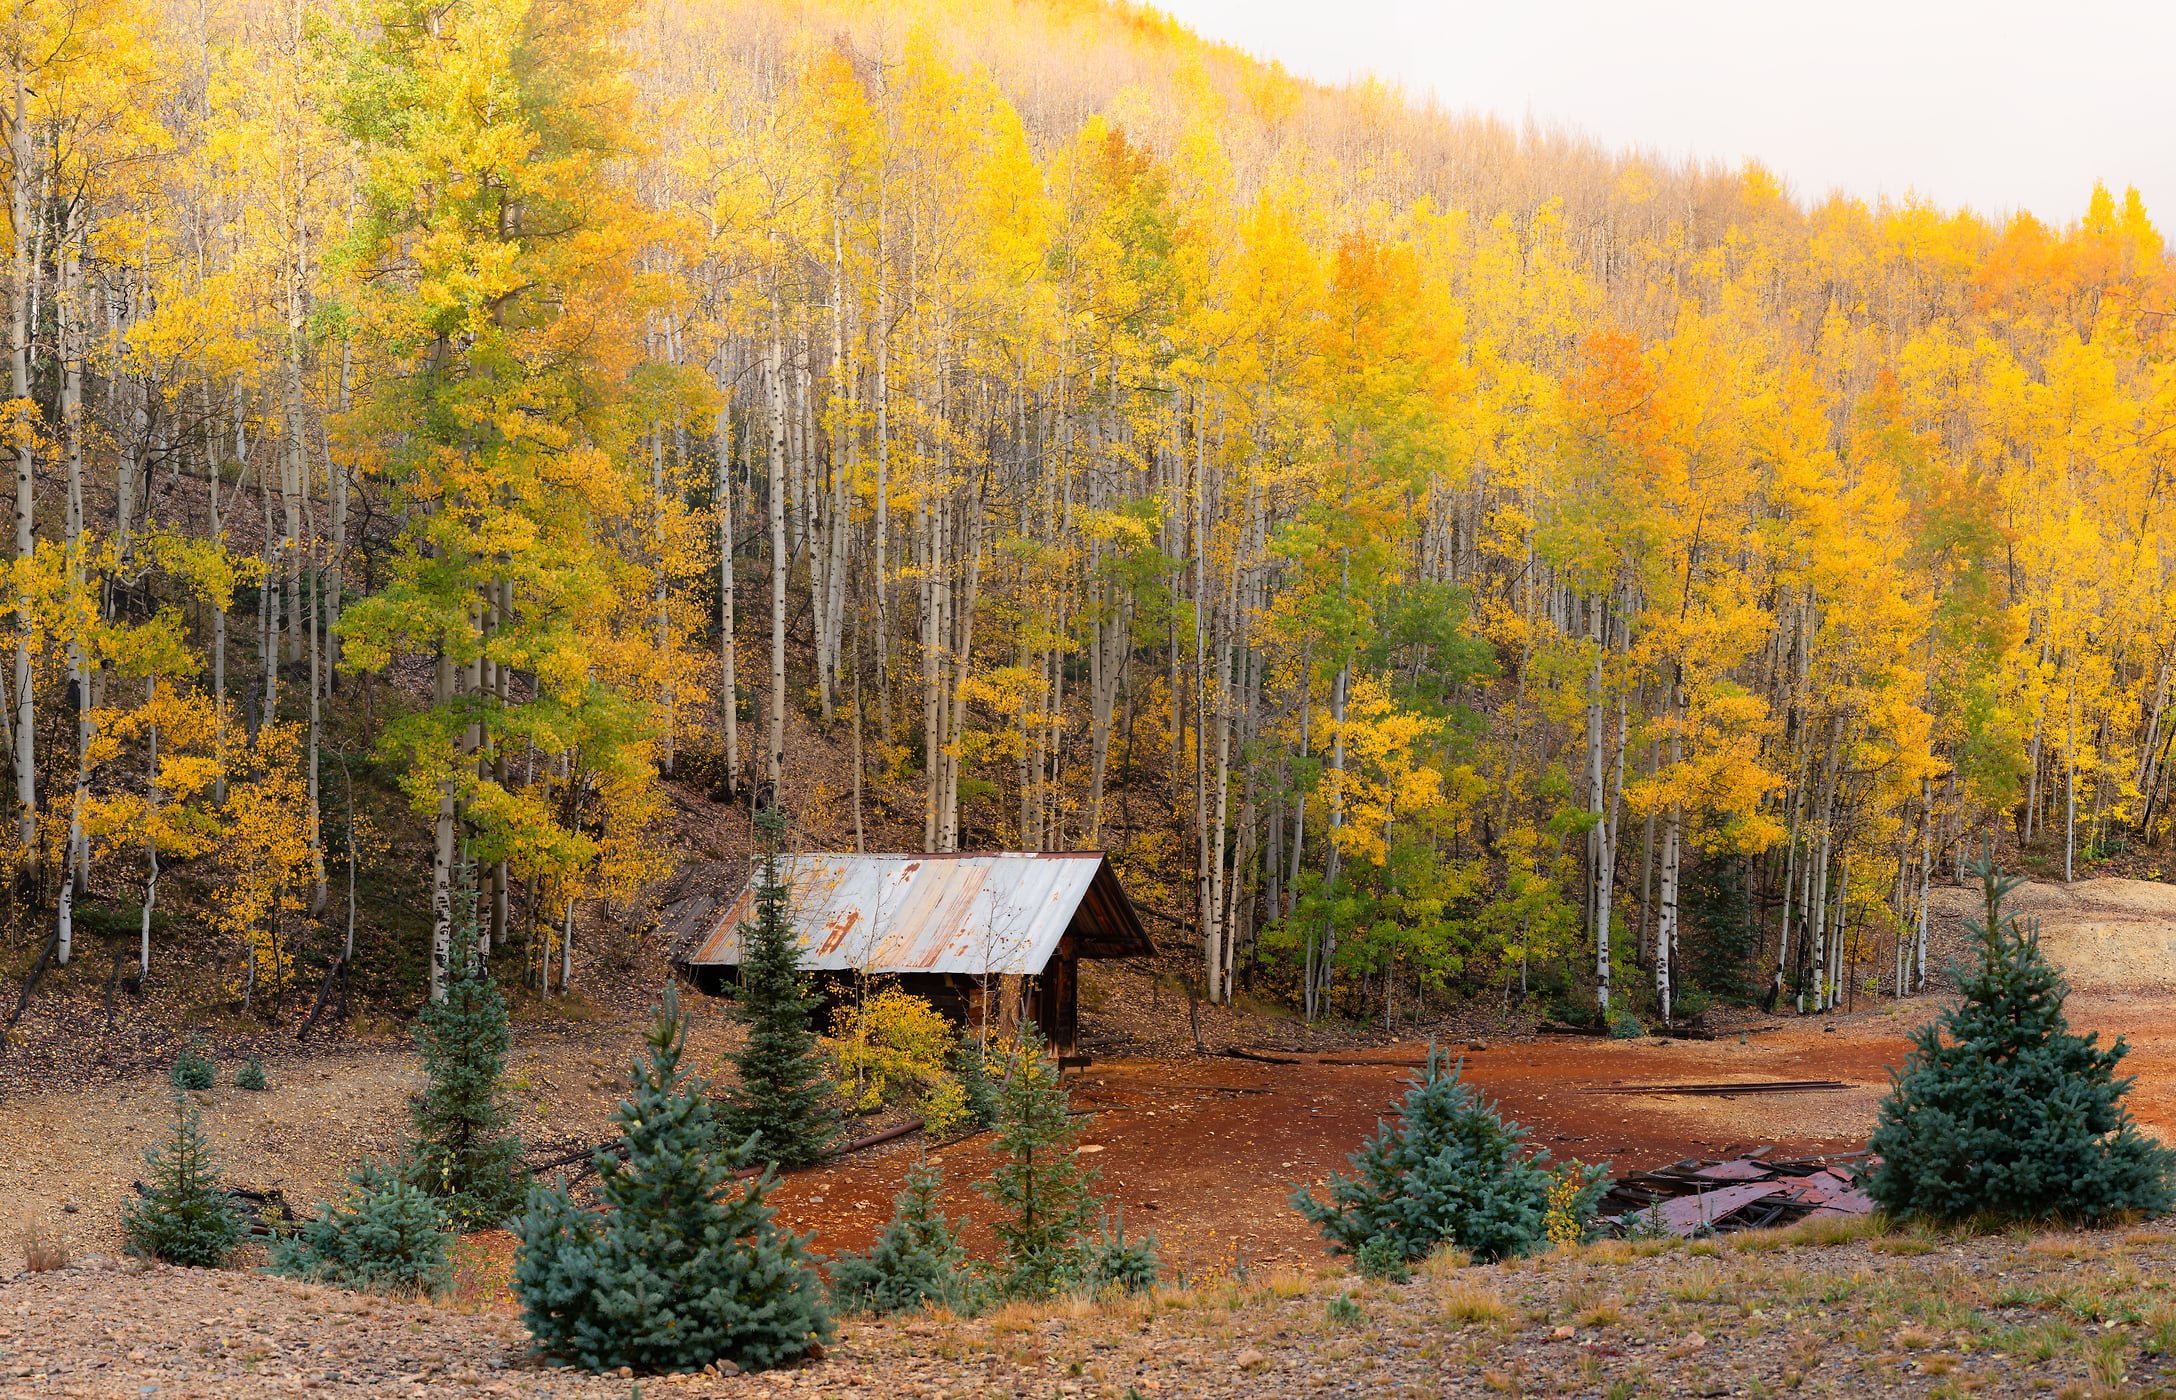 573 megapixels! A very high resolution, large-format VAST photo print of a Colorado mine in front of autumn foliage on aspen trees; photograph created by Phillip Noll in Ironton Park, Colorado